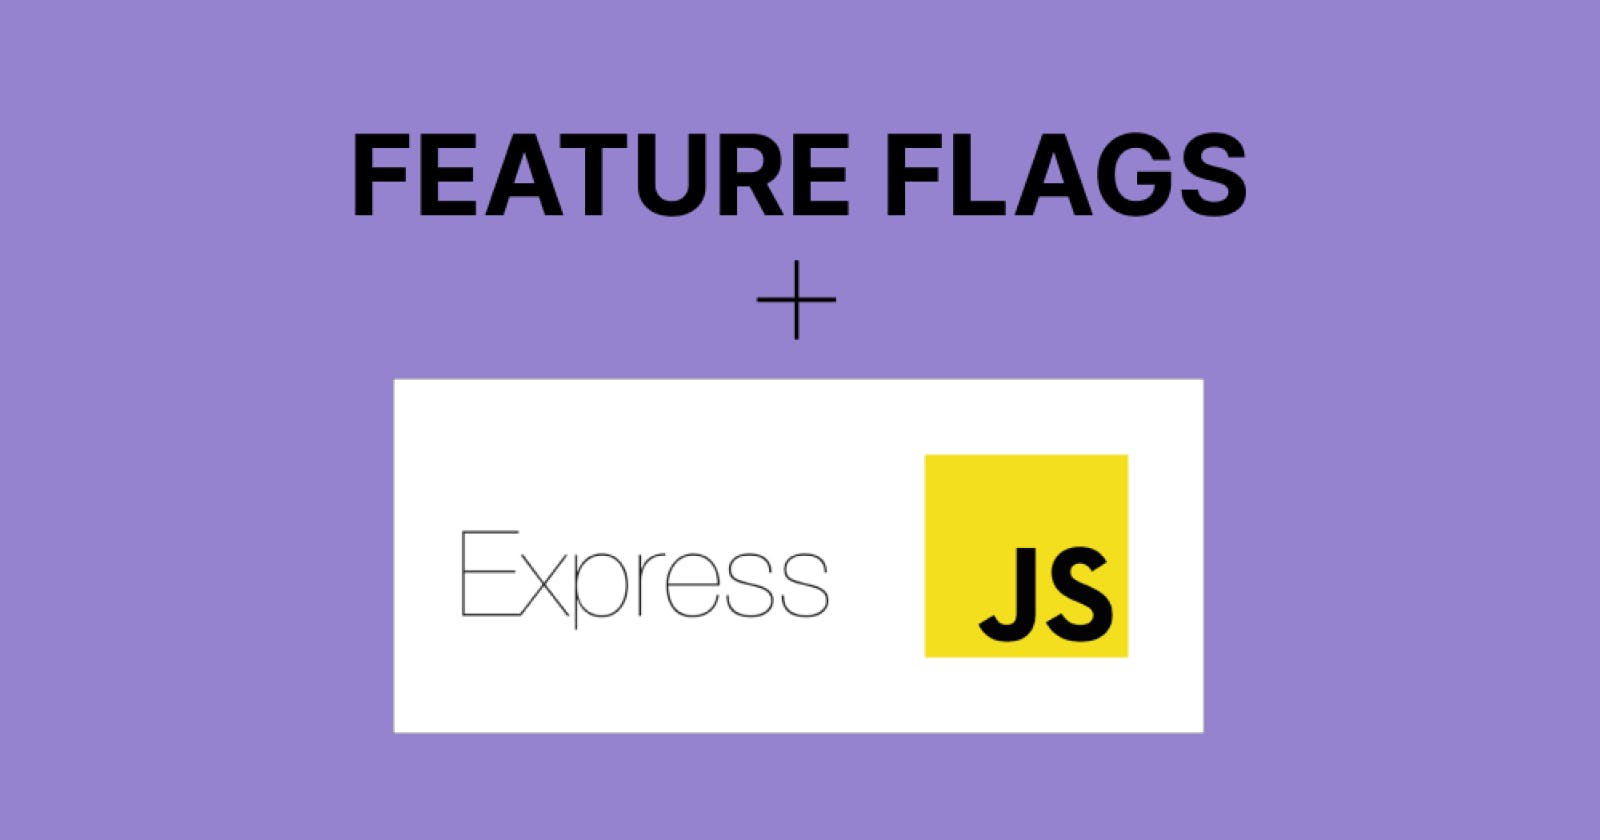 How To use Feature Flags in an ExpressJS application